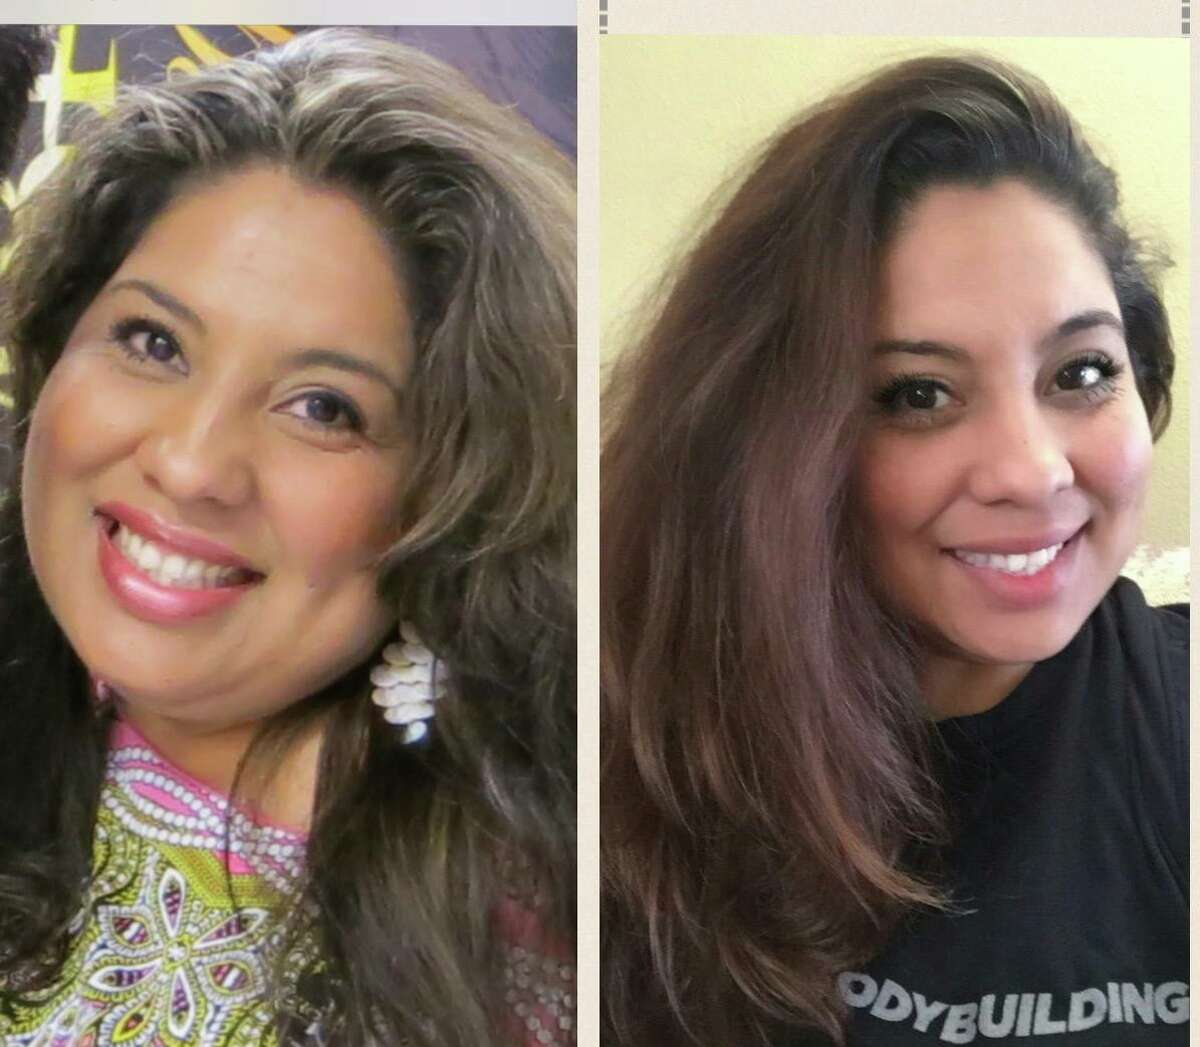 Michelle Trevino dropped more than 37 pounds with the free help of local trainer, Myra Perez.